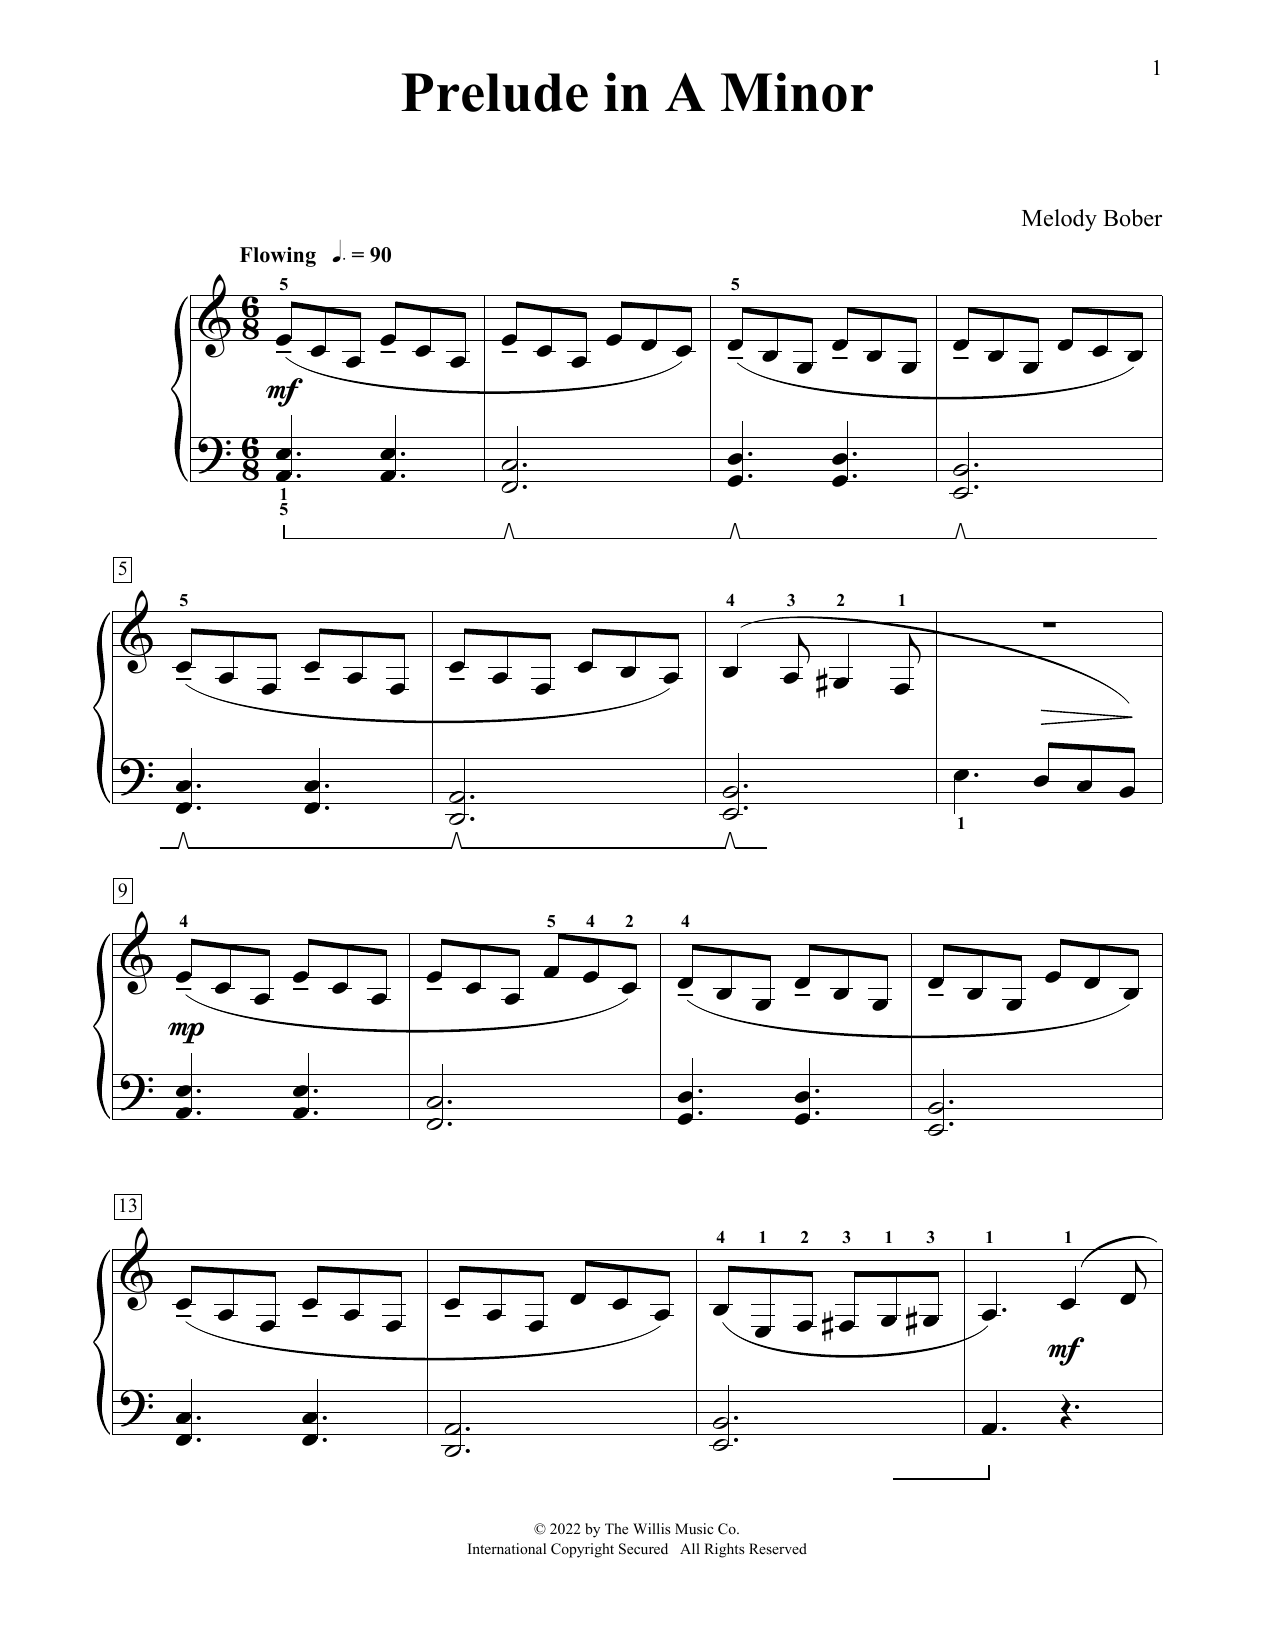 Download Melody Bober Prelude In A Minor Sheet Music